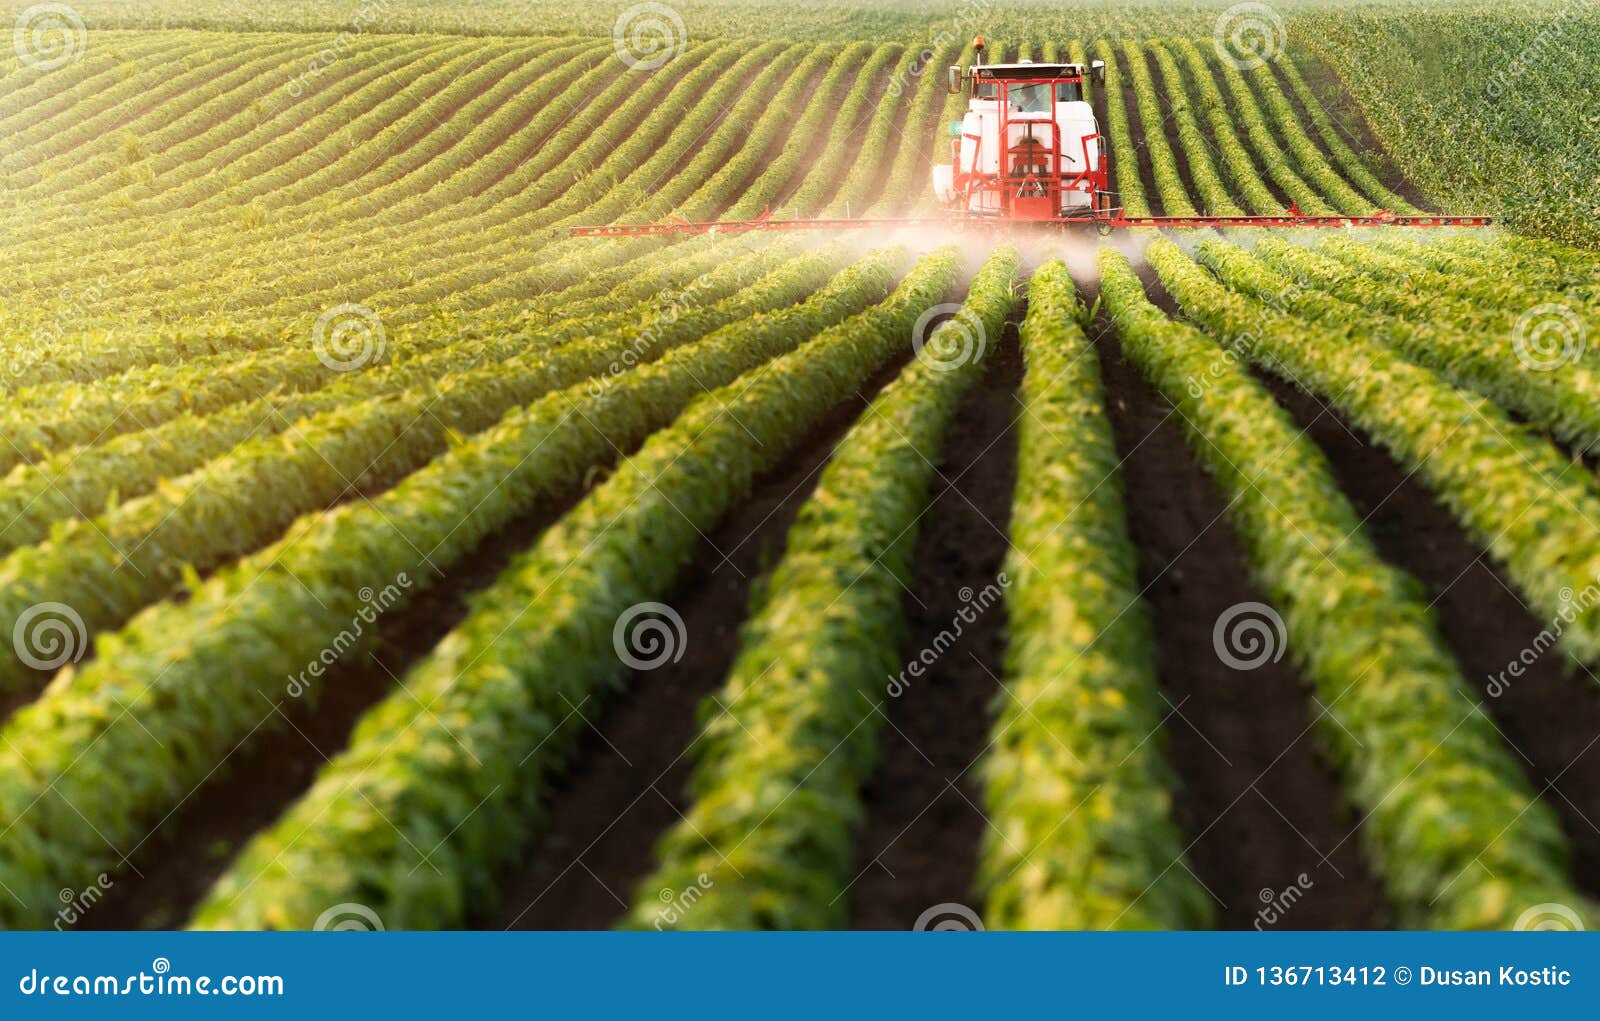 tractor spraying pesticides at soy bean field